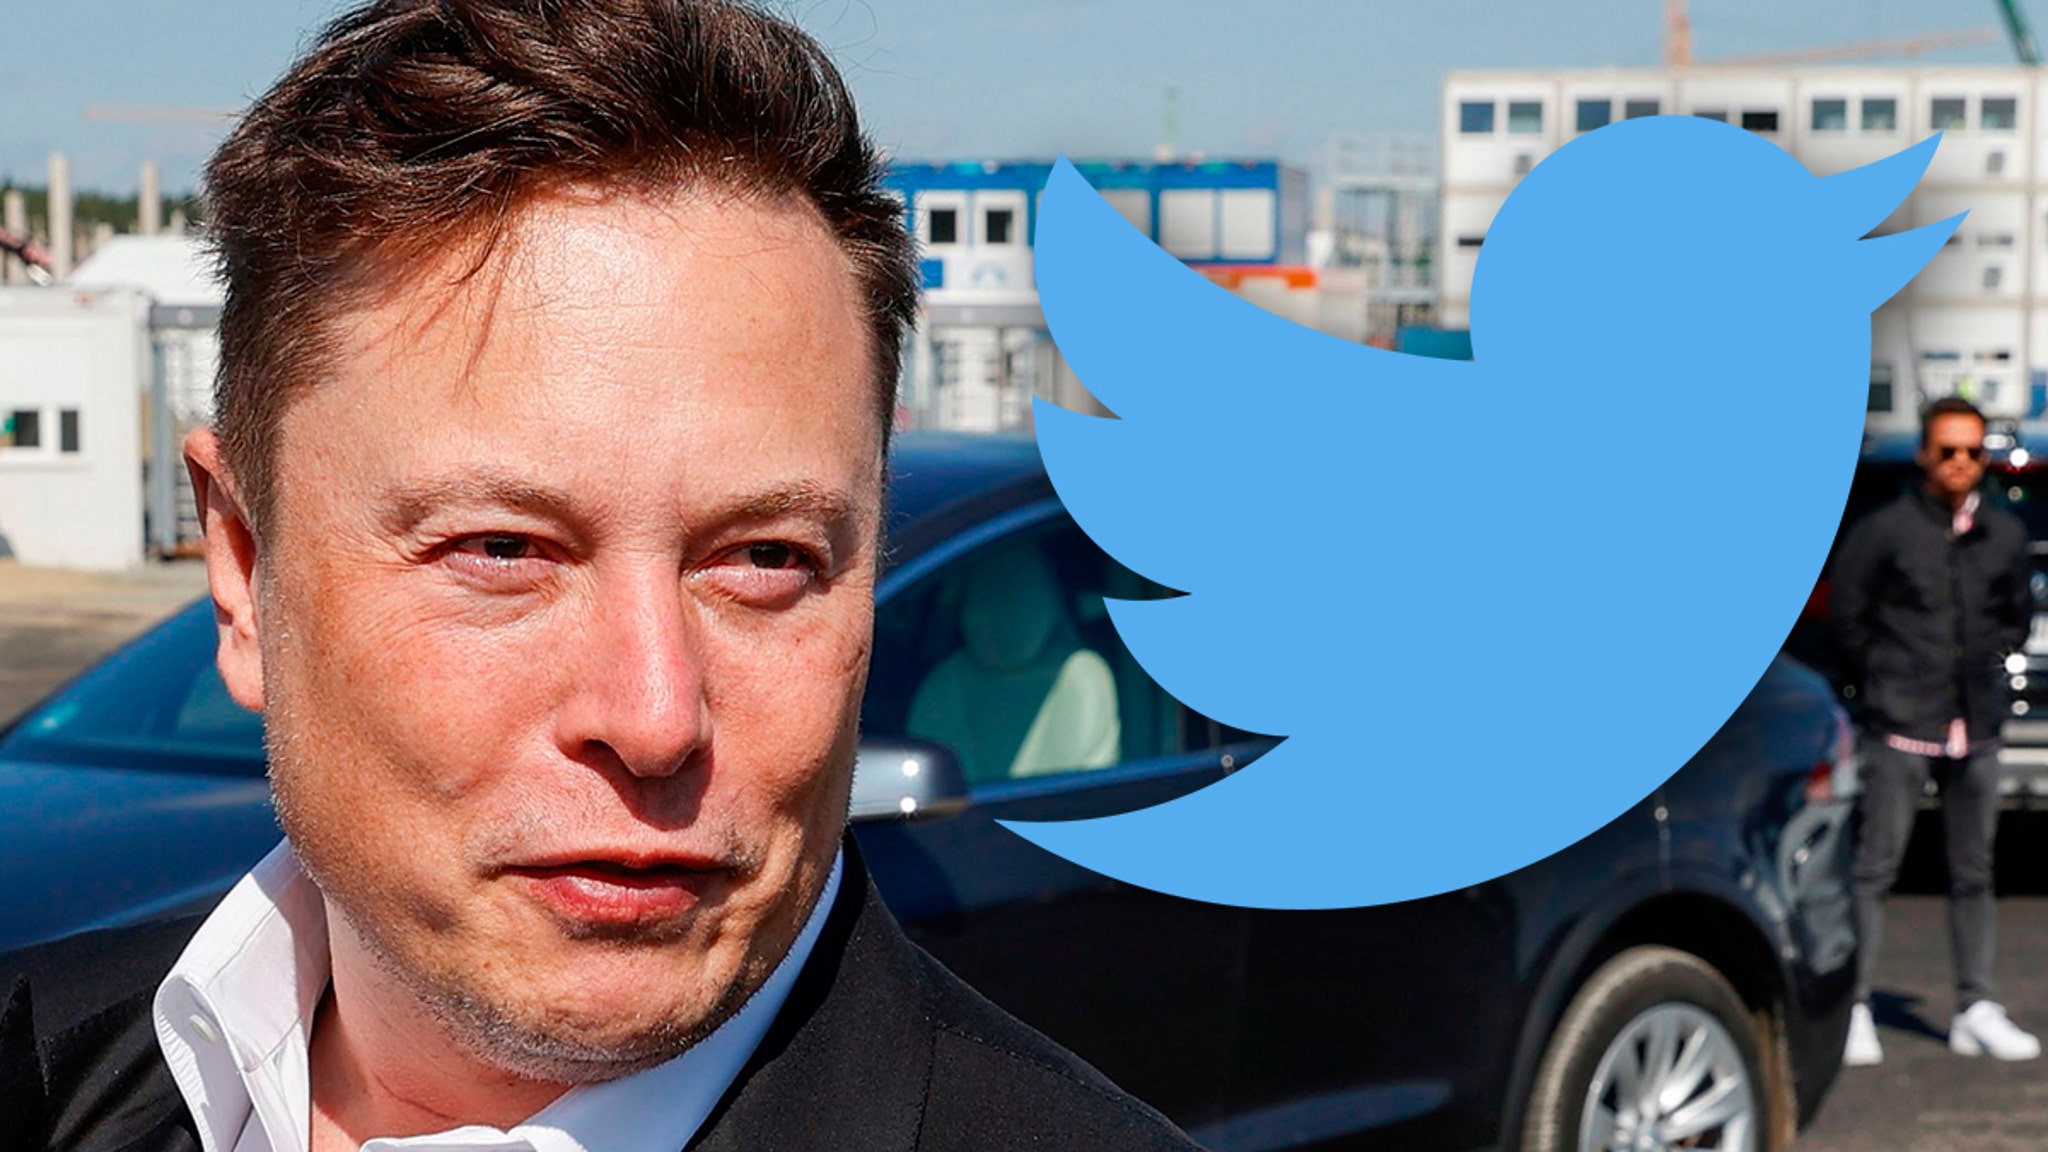 Elon Musk Reportedly Fires 4 Top Twitter Executives After $44 Billion Purchase